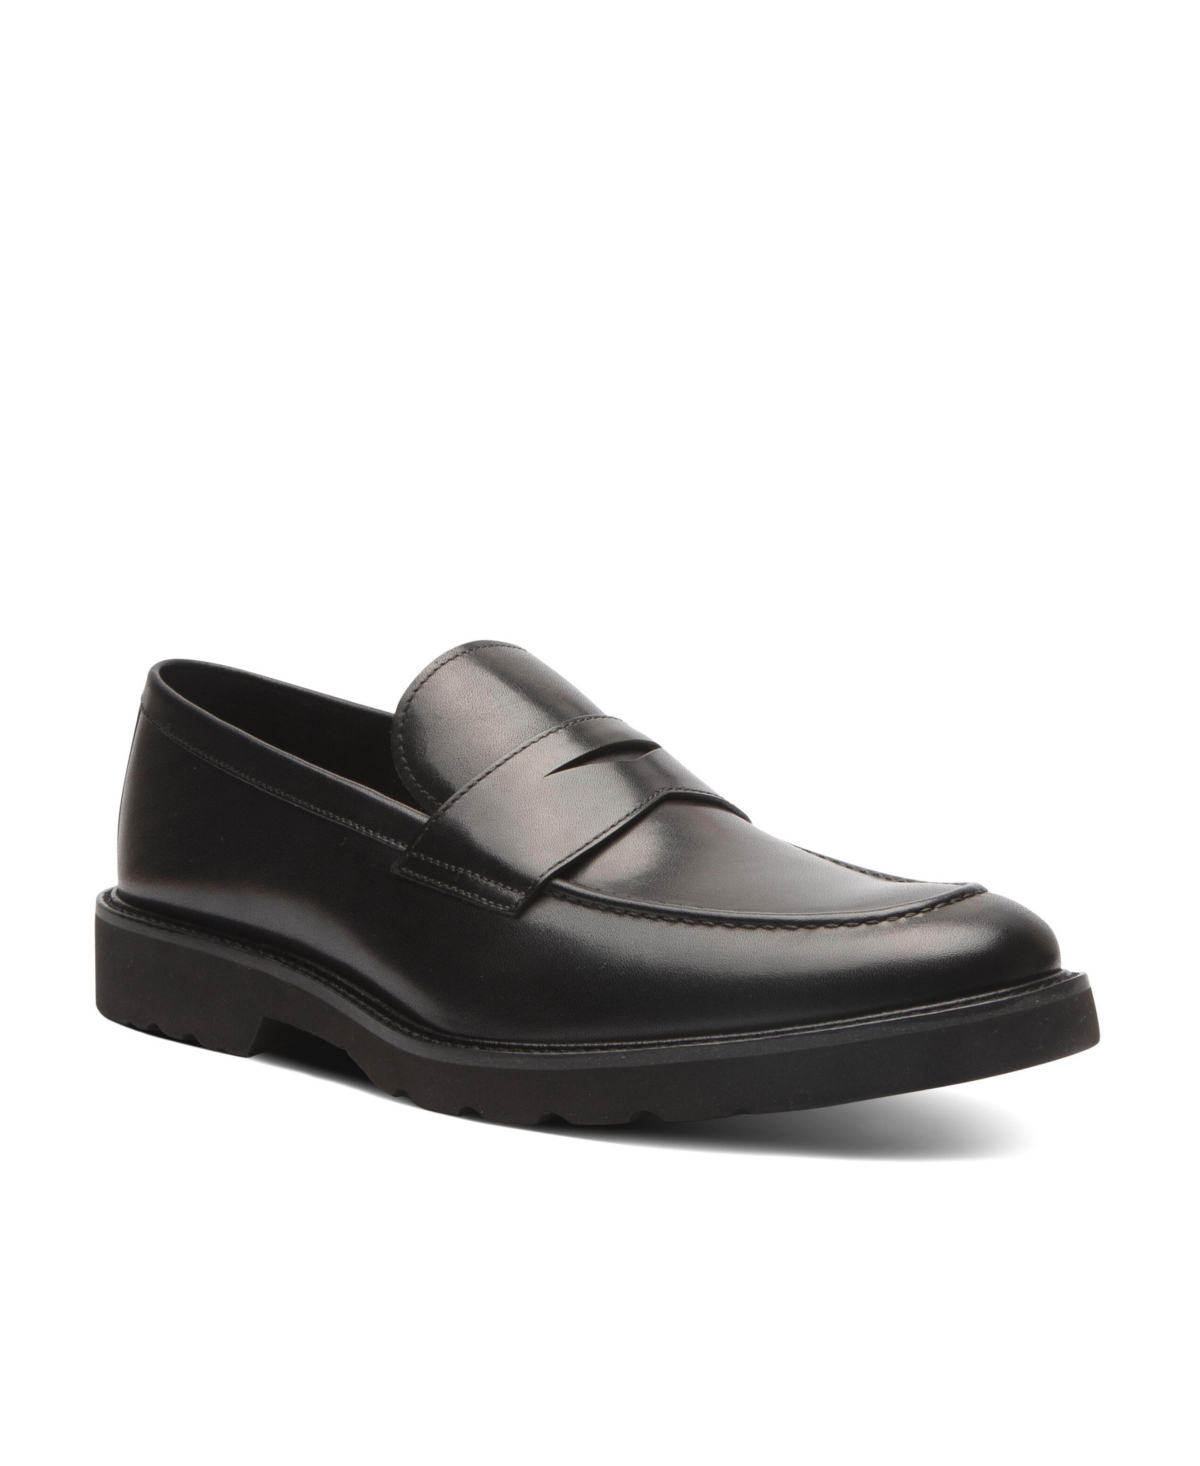 BLAKE MCKAY MEN'S POWELL PENNY CASUAL SLIP-ON PENNY LOAFER